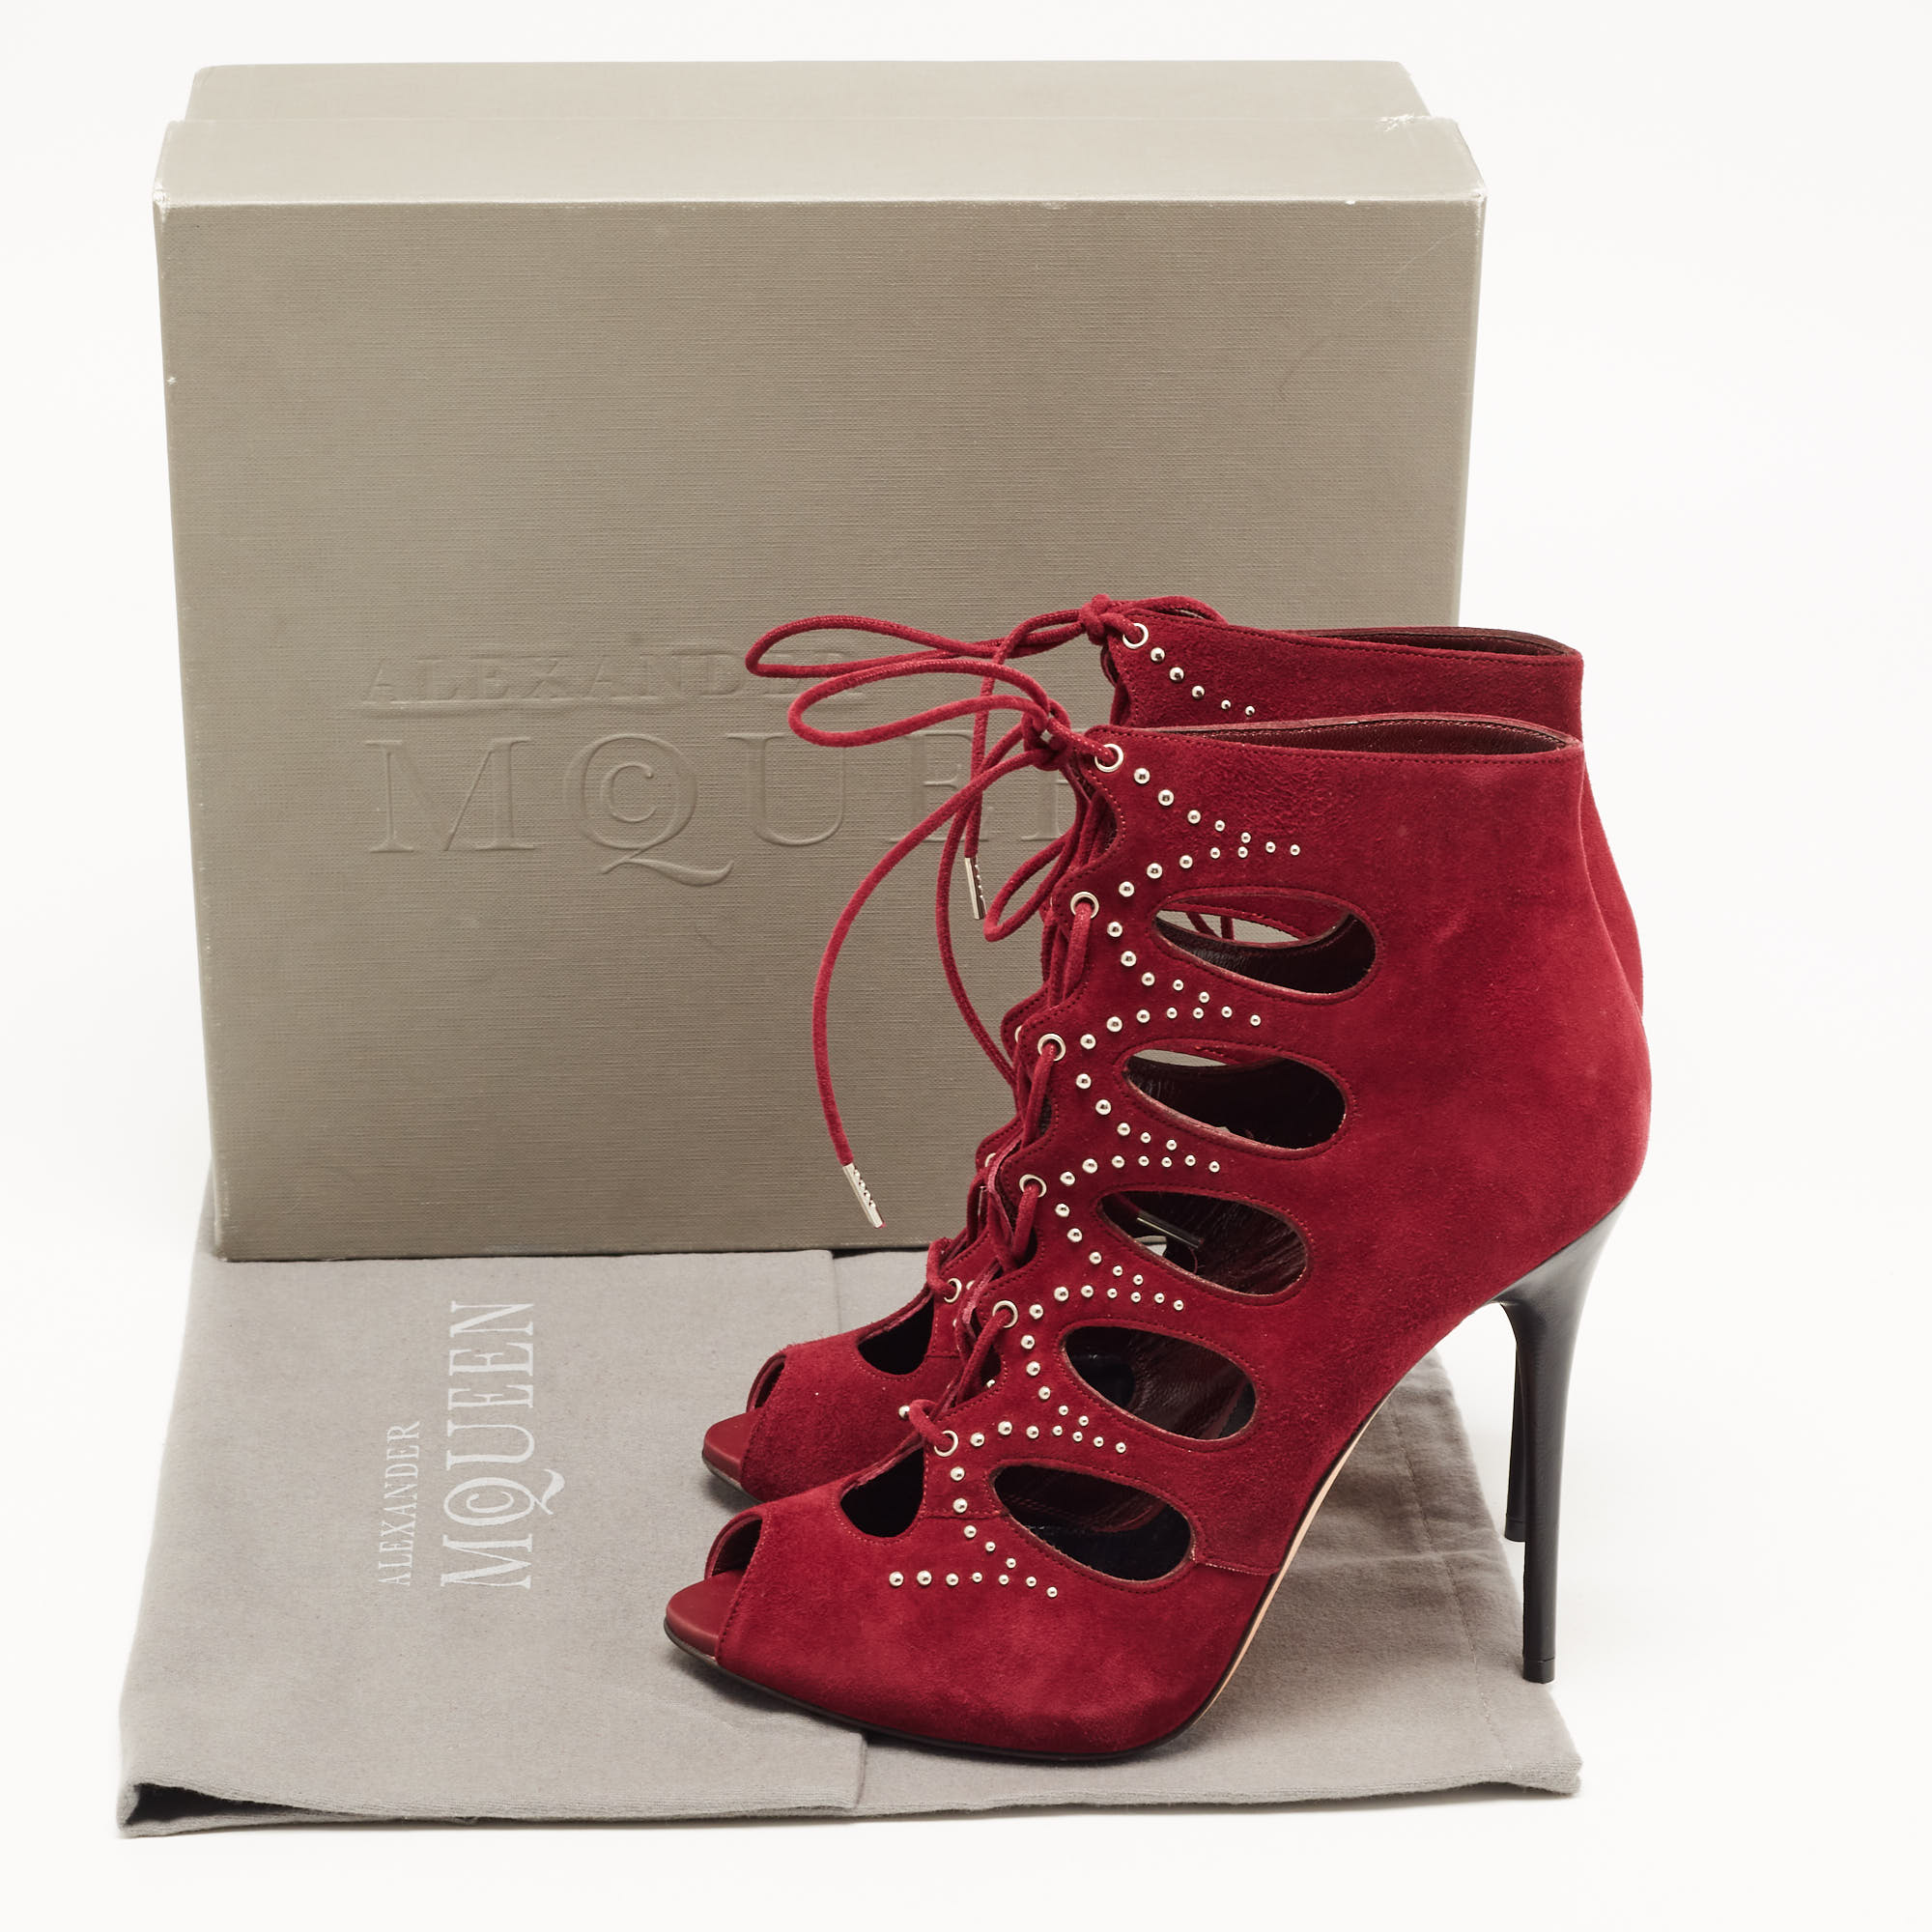 Alexander McQueen Burgundy Suede Cut Out Embellished Lace Up Ankle Booties Size 38